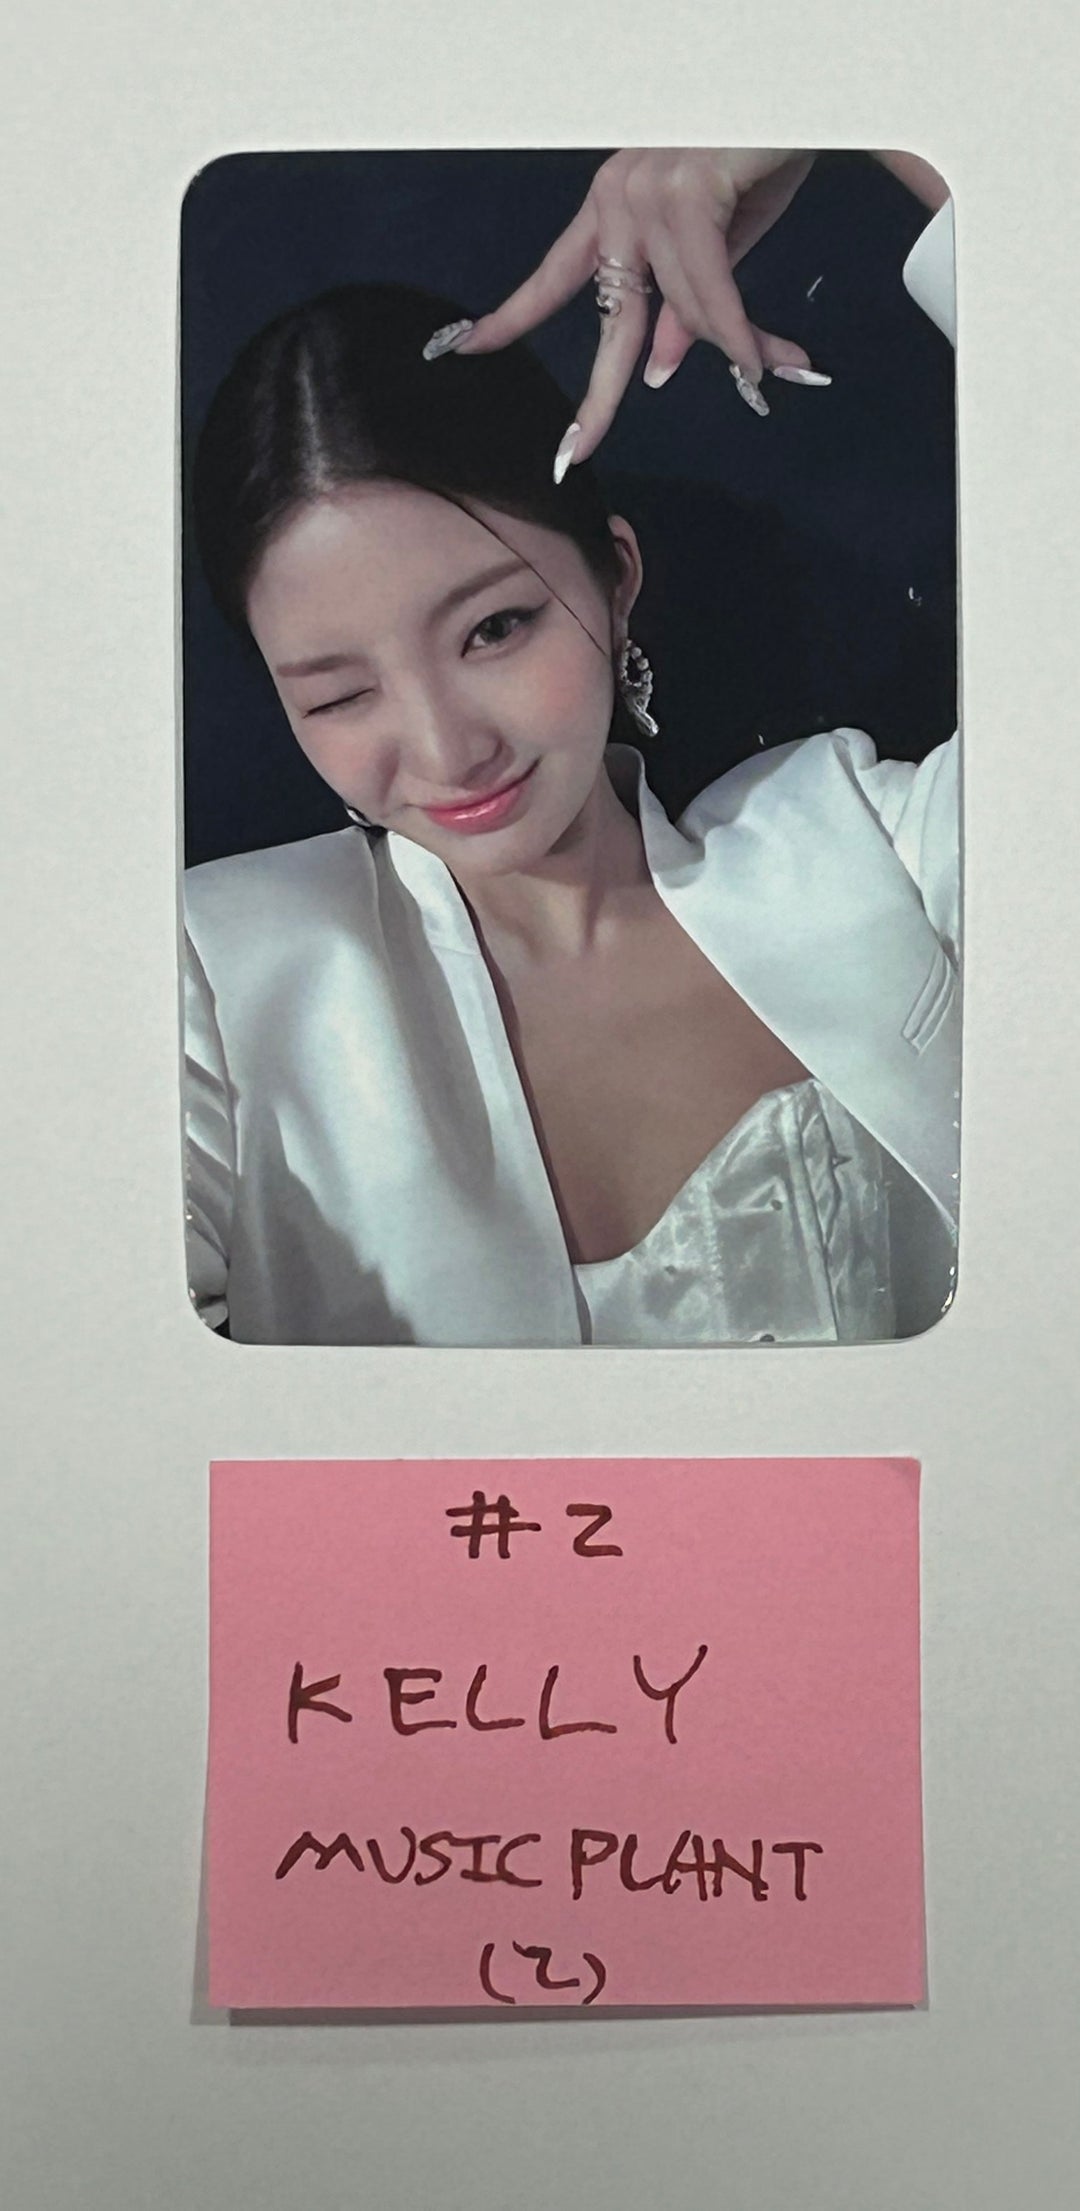 TRI.BE "Diamond" - Music Plant Fansign Event Photocard [24.3.7]